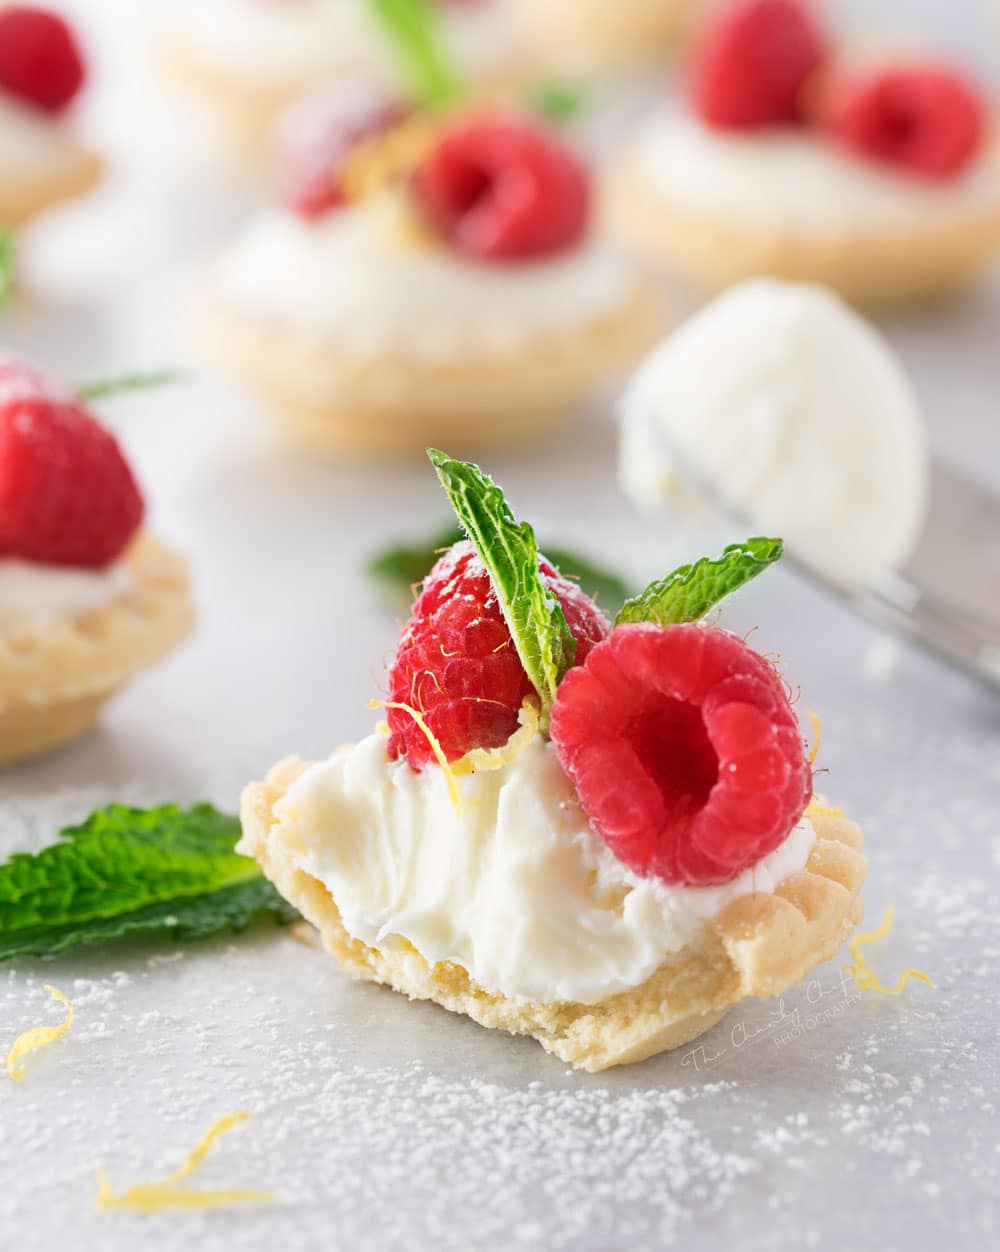 Mini No Bake White Chocolate Lemon Cheesecake Tarts | Creamy no bake white chocolate lemon cheesecake tarts, topped with your favorite fresh fruit, mint, and a dusting of powdered sugar. Impressive and easy! | http://thechunkychef.com